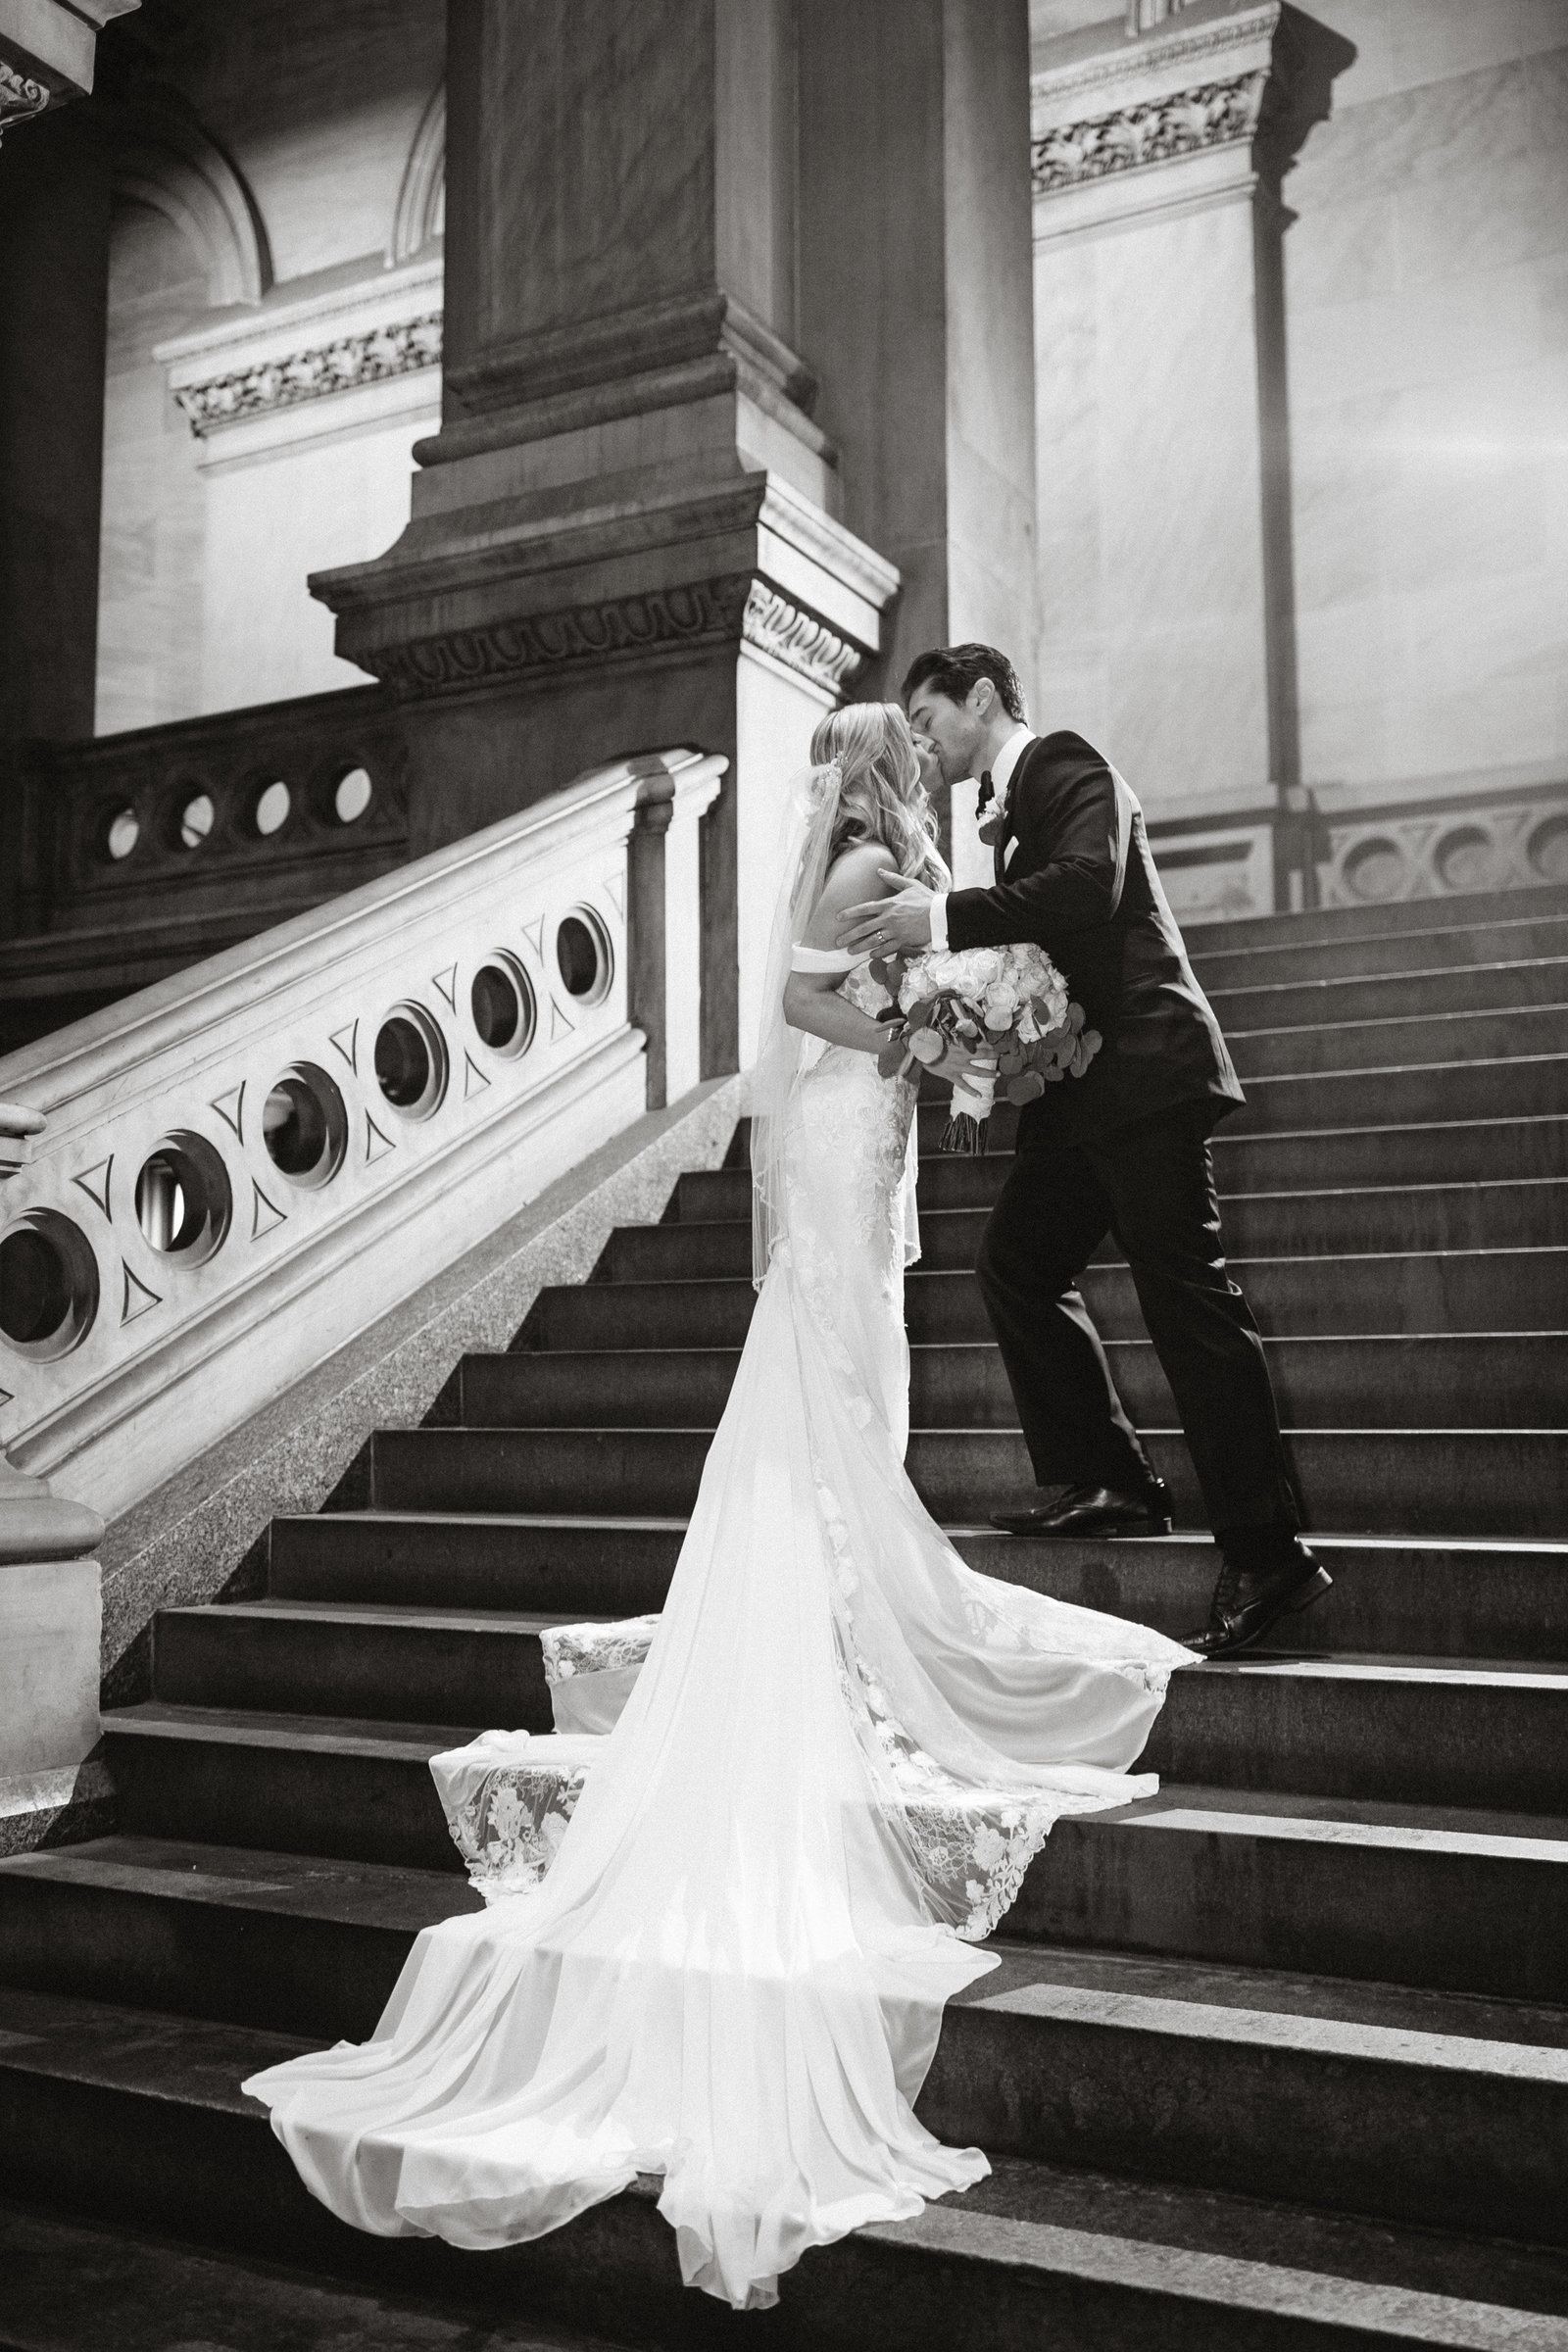 Dramatic portrait of the bride and groom at Philadelphia's City Hall.